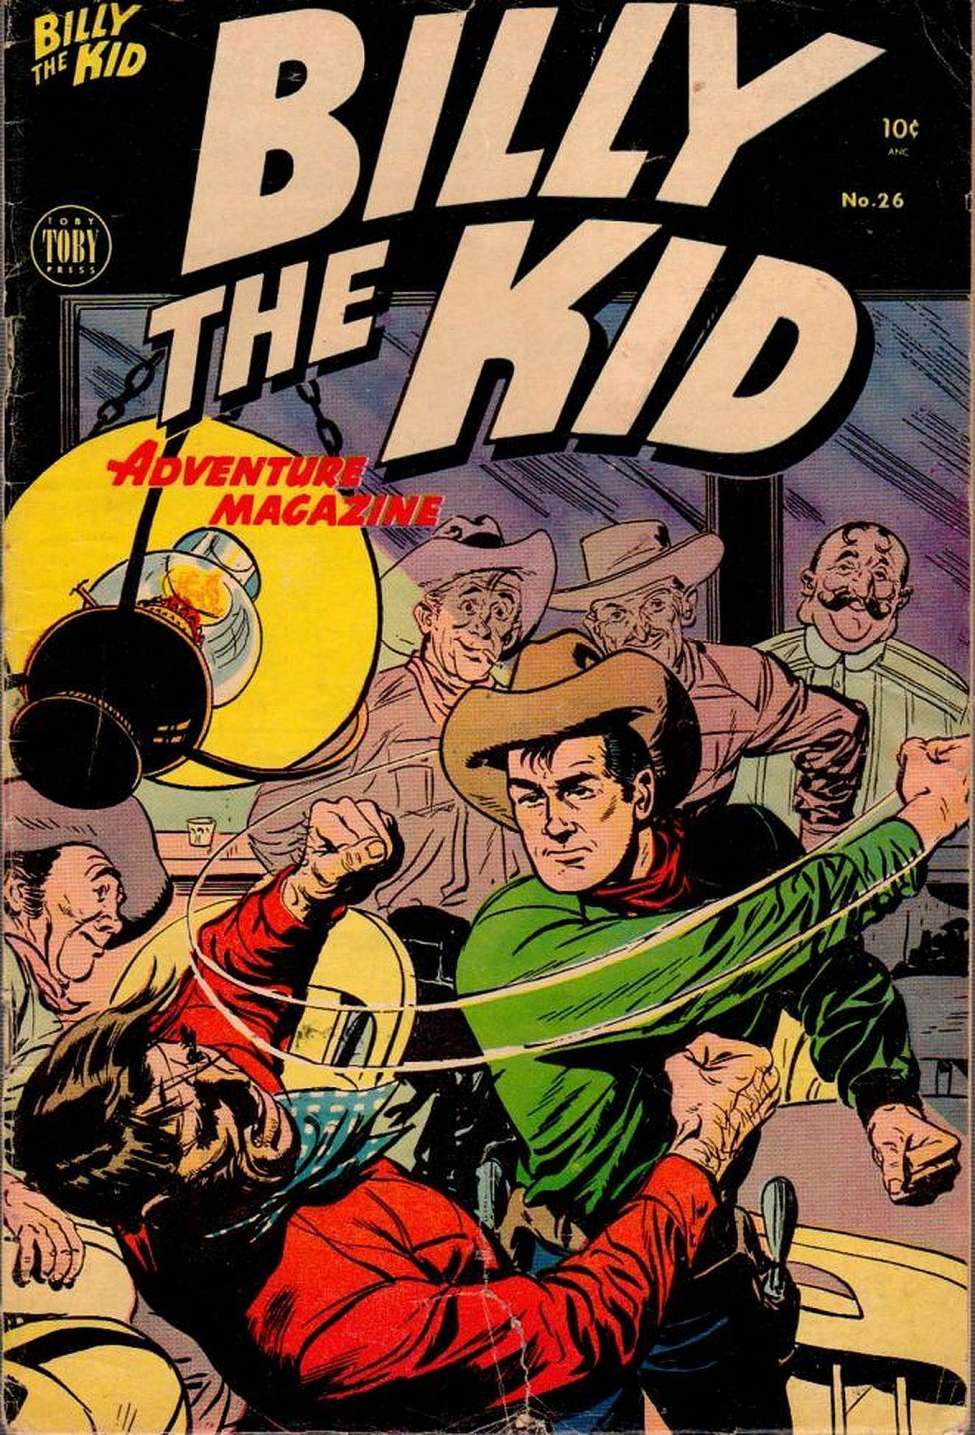 Comic Book Cover For Billy the Kid Adventure Magazine 26 (alt) - Version 2